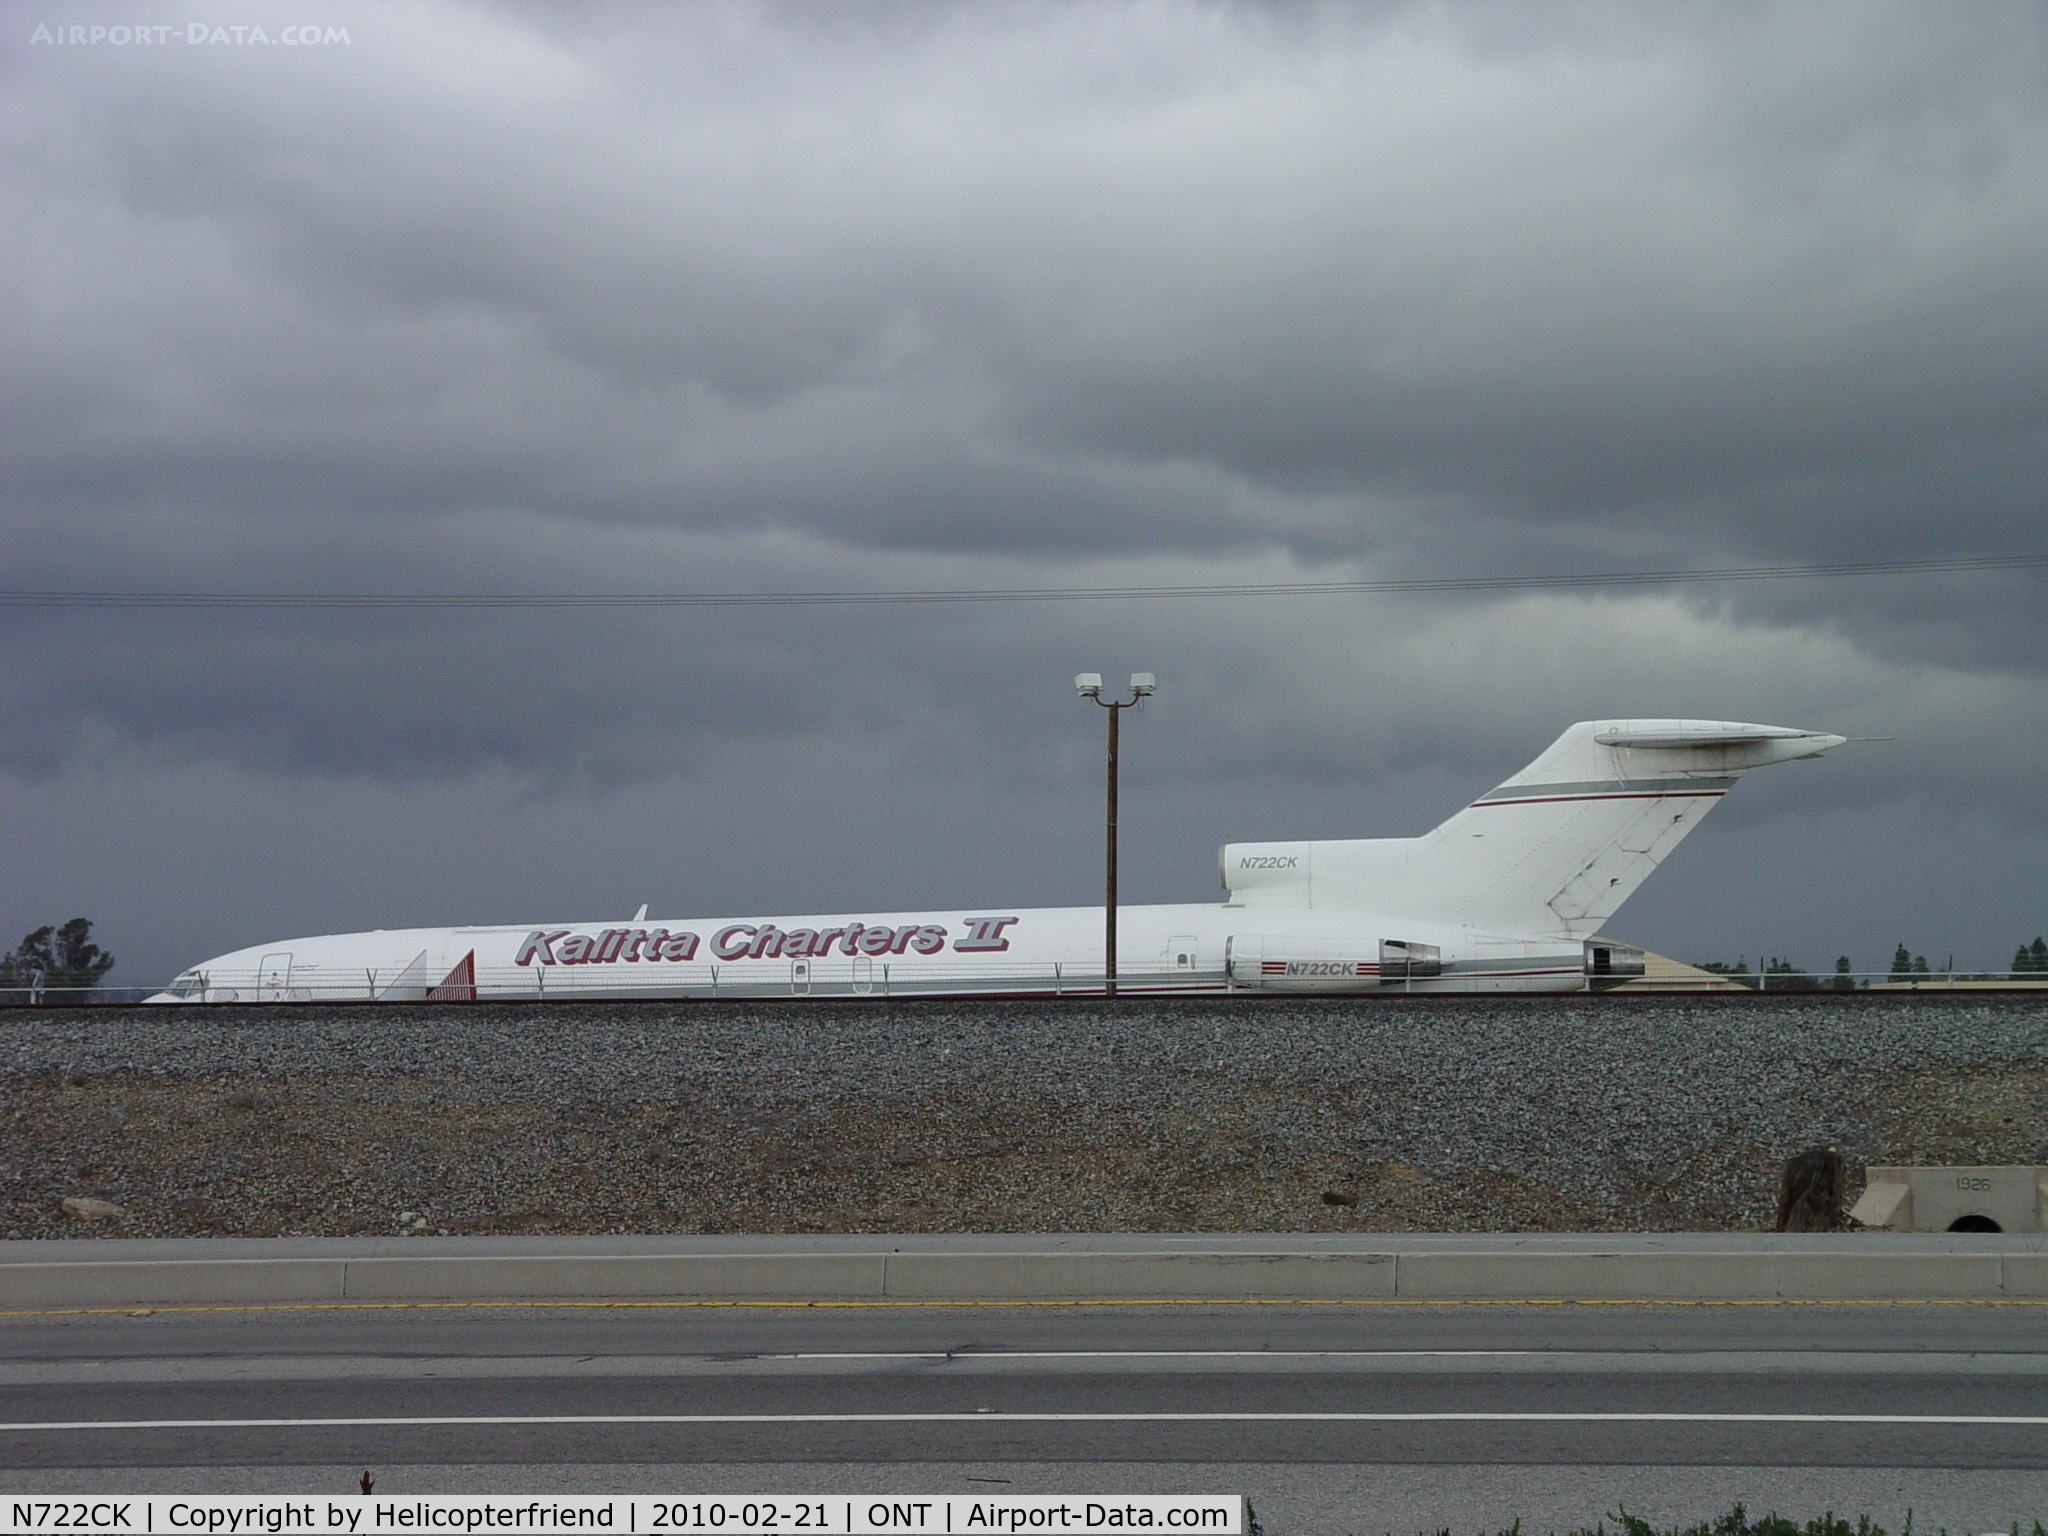 N722CK, 1974 Boeing 727-2H3 C/N 20948, Parked at the Southern most western parking area available, hid by RR Tracks